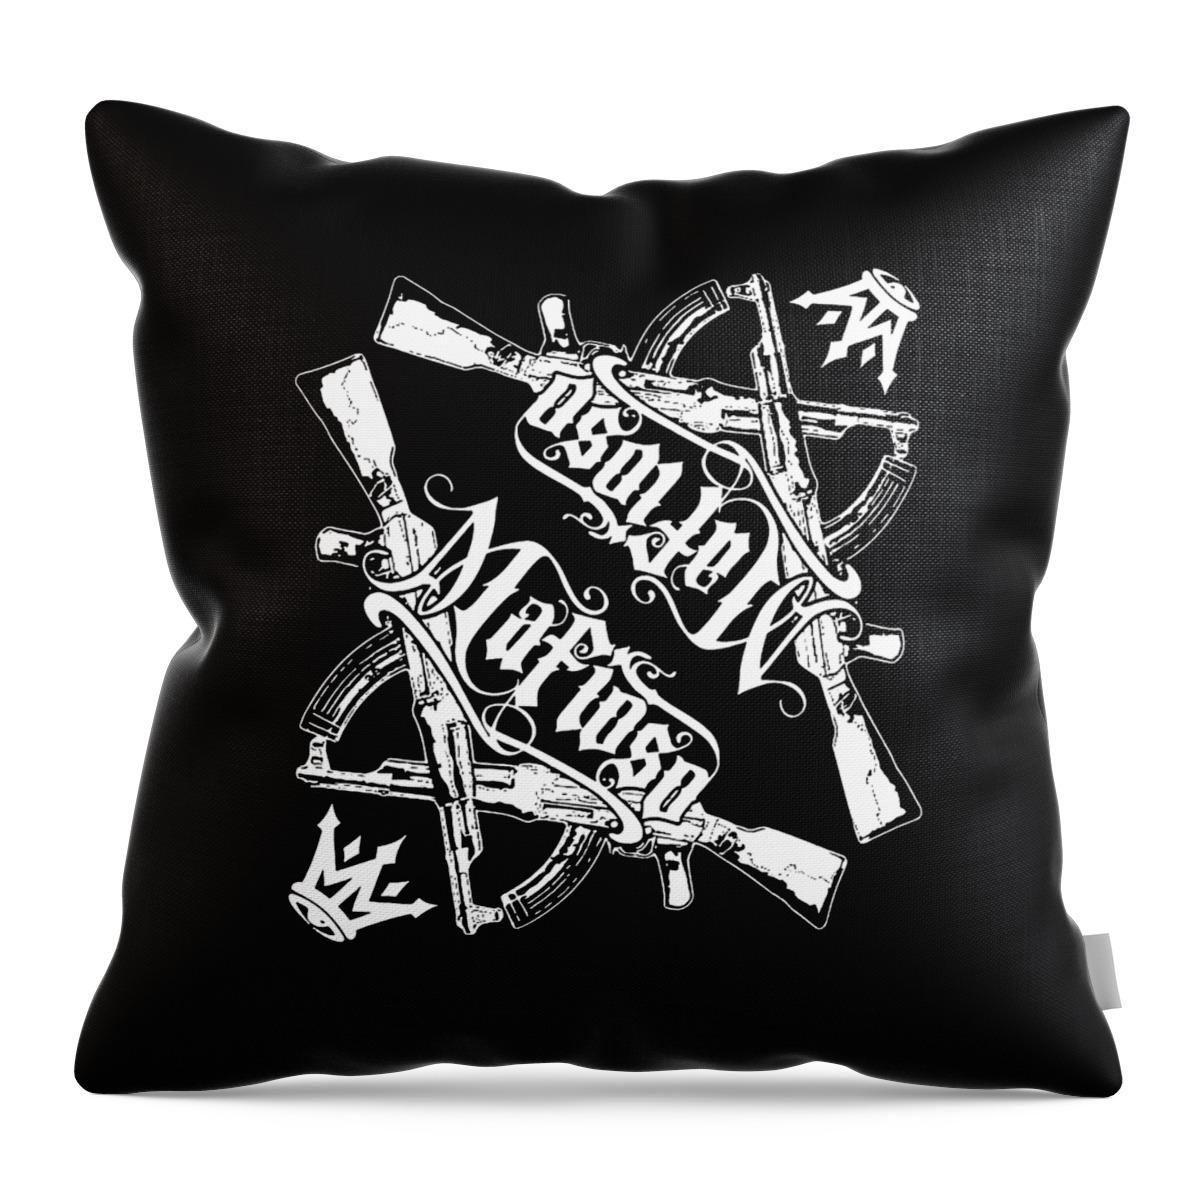 Mafioso Throw Pillow featuring the drawing The Godfather by Larosa Joss